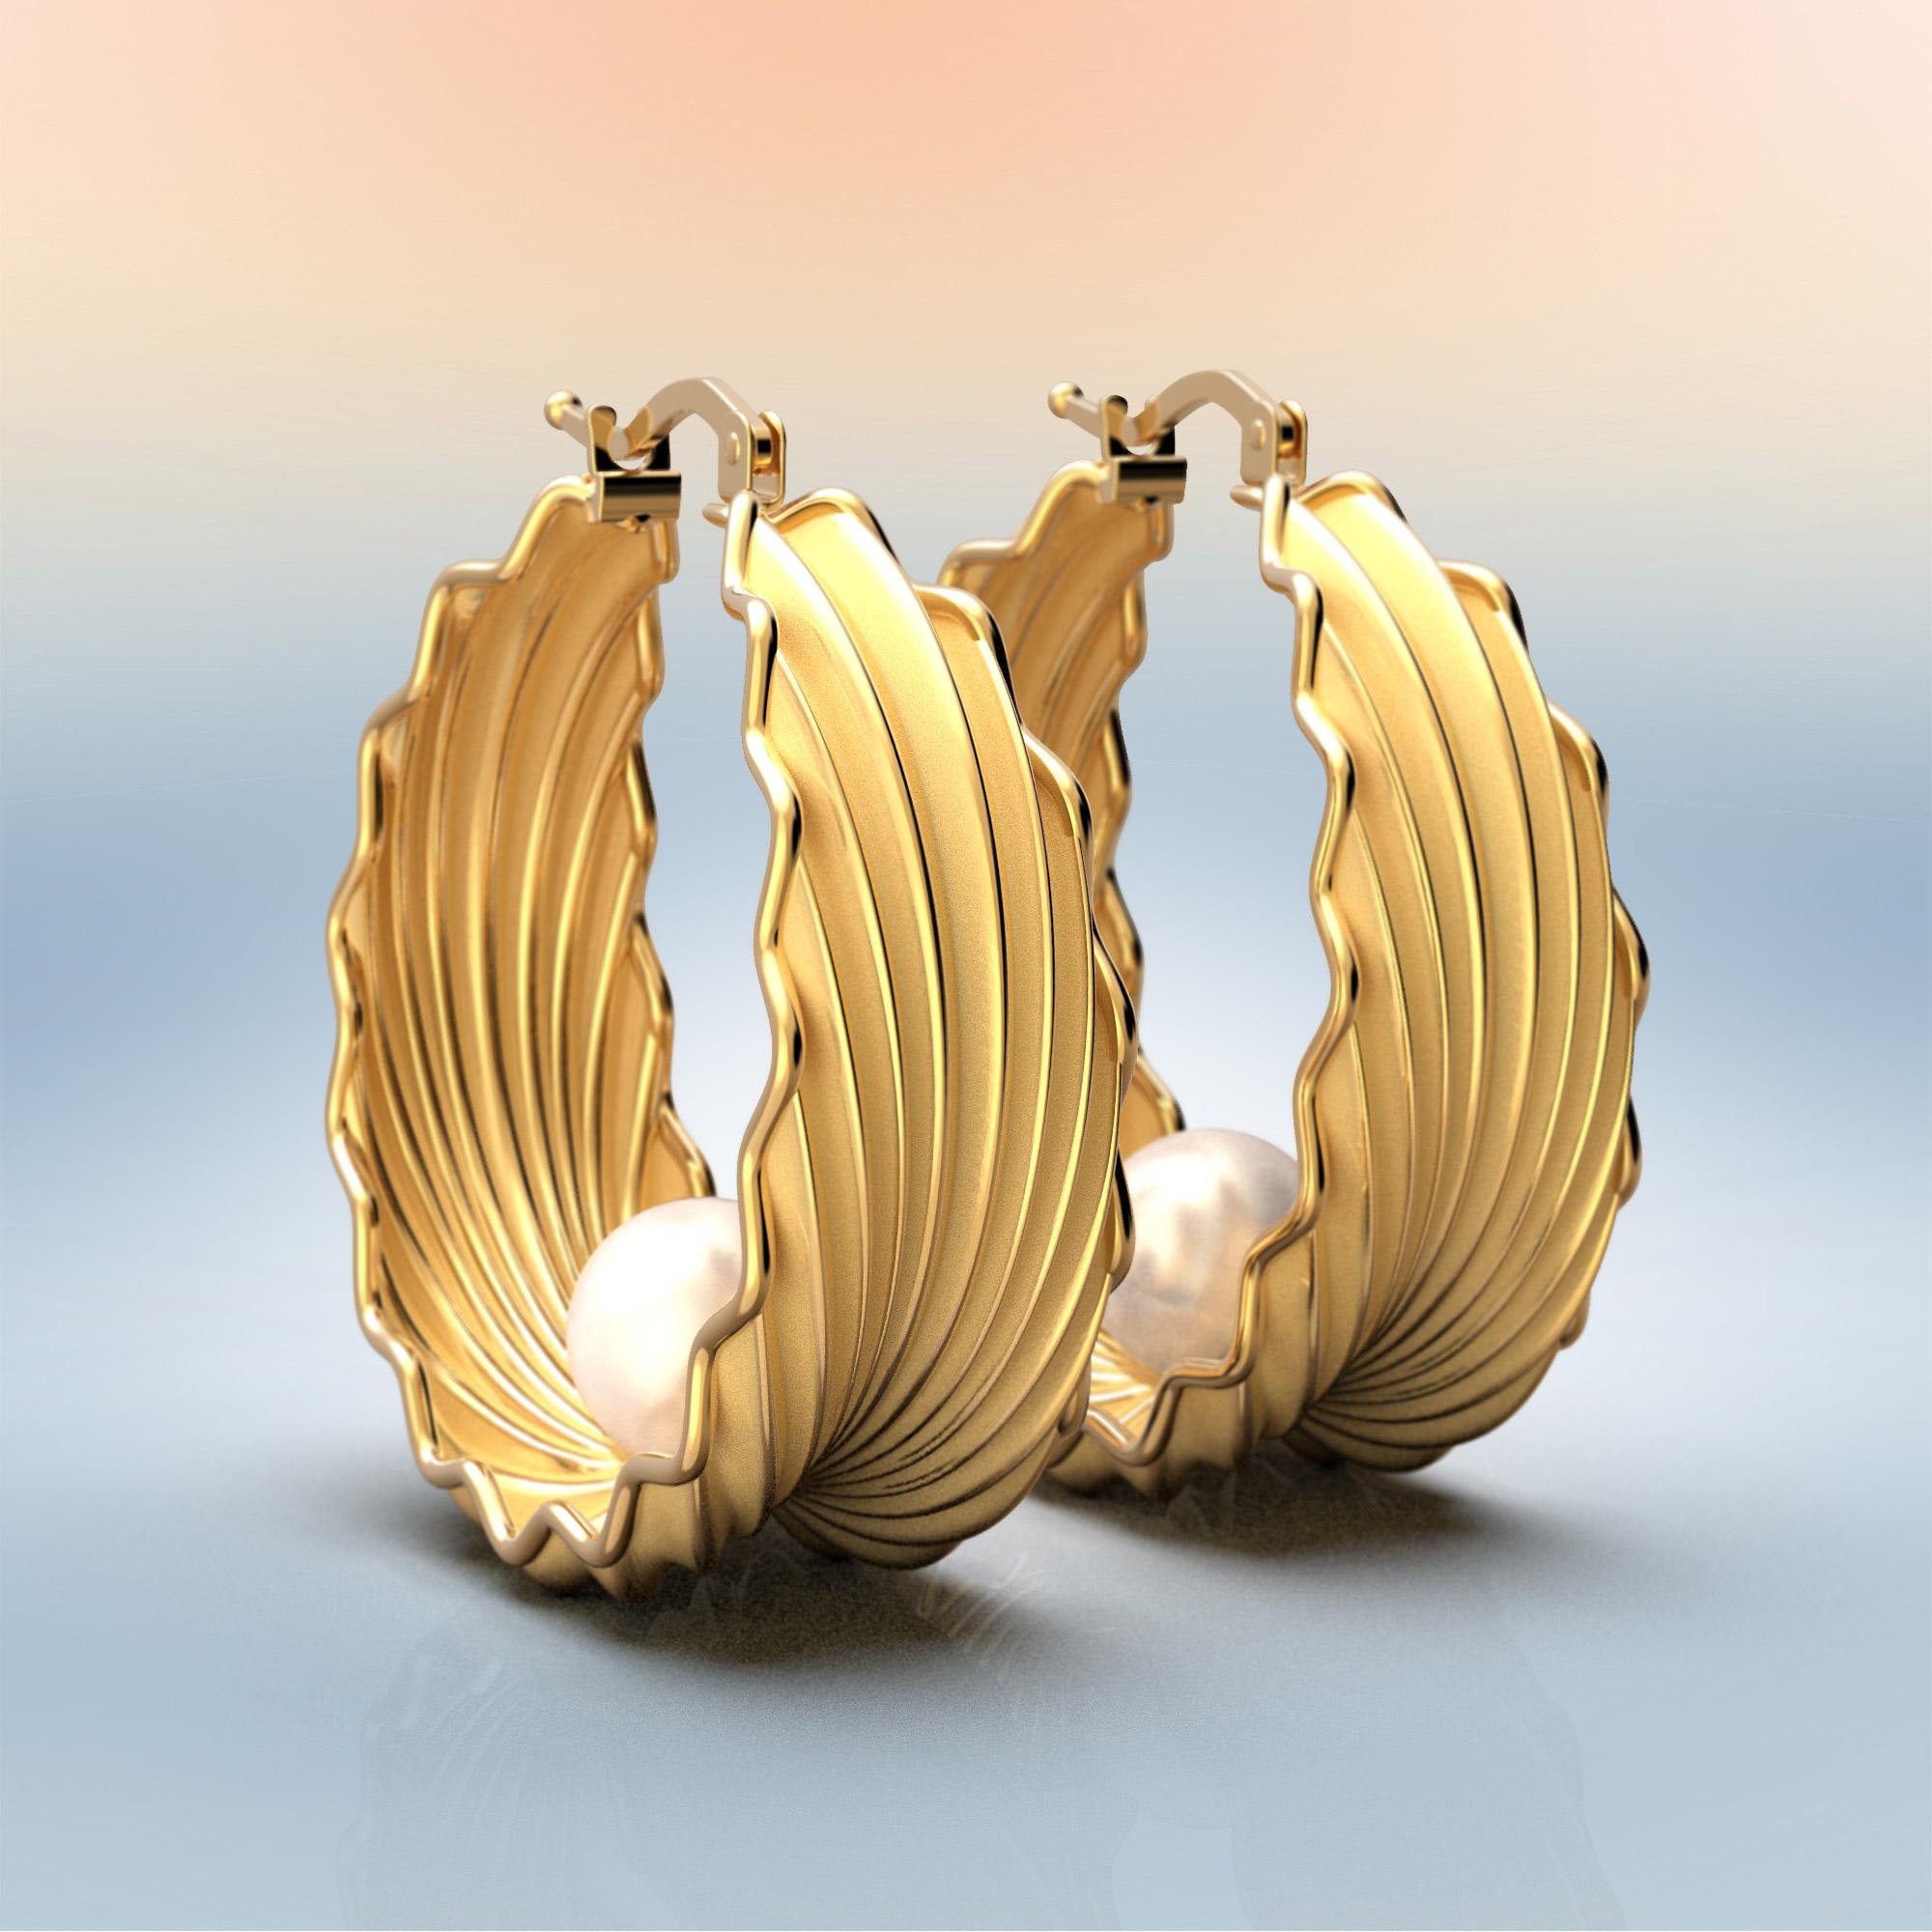 Oltremare Gioielli hoop earrings, natural white Akoya pearls, Japanese pearl earrings.
32 mm diameter beautiful hoop earrings crafted in polished and raw solid gold 18k with natural sea pearl
Click top closure Gold hoop earrings made in Italy.
The